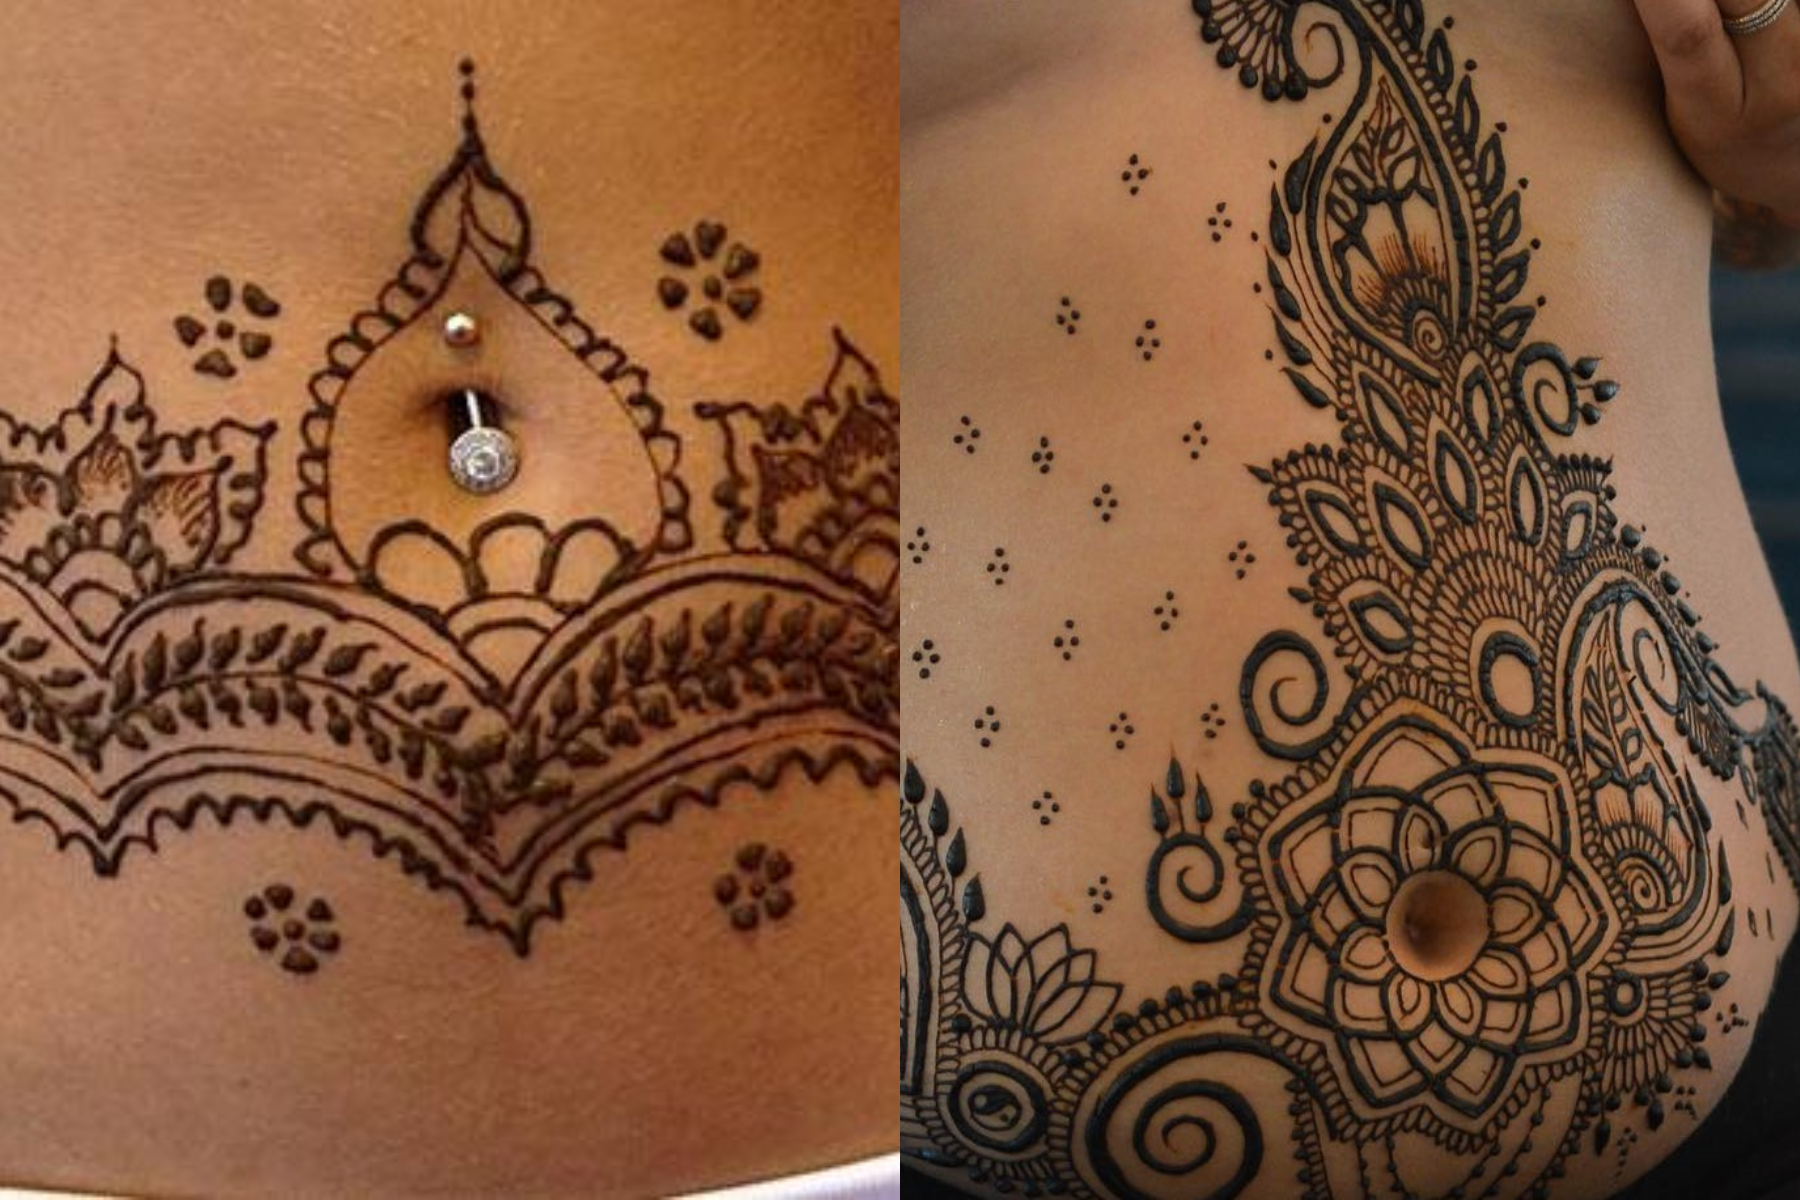 Two ladies with brown henna tattoos